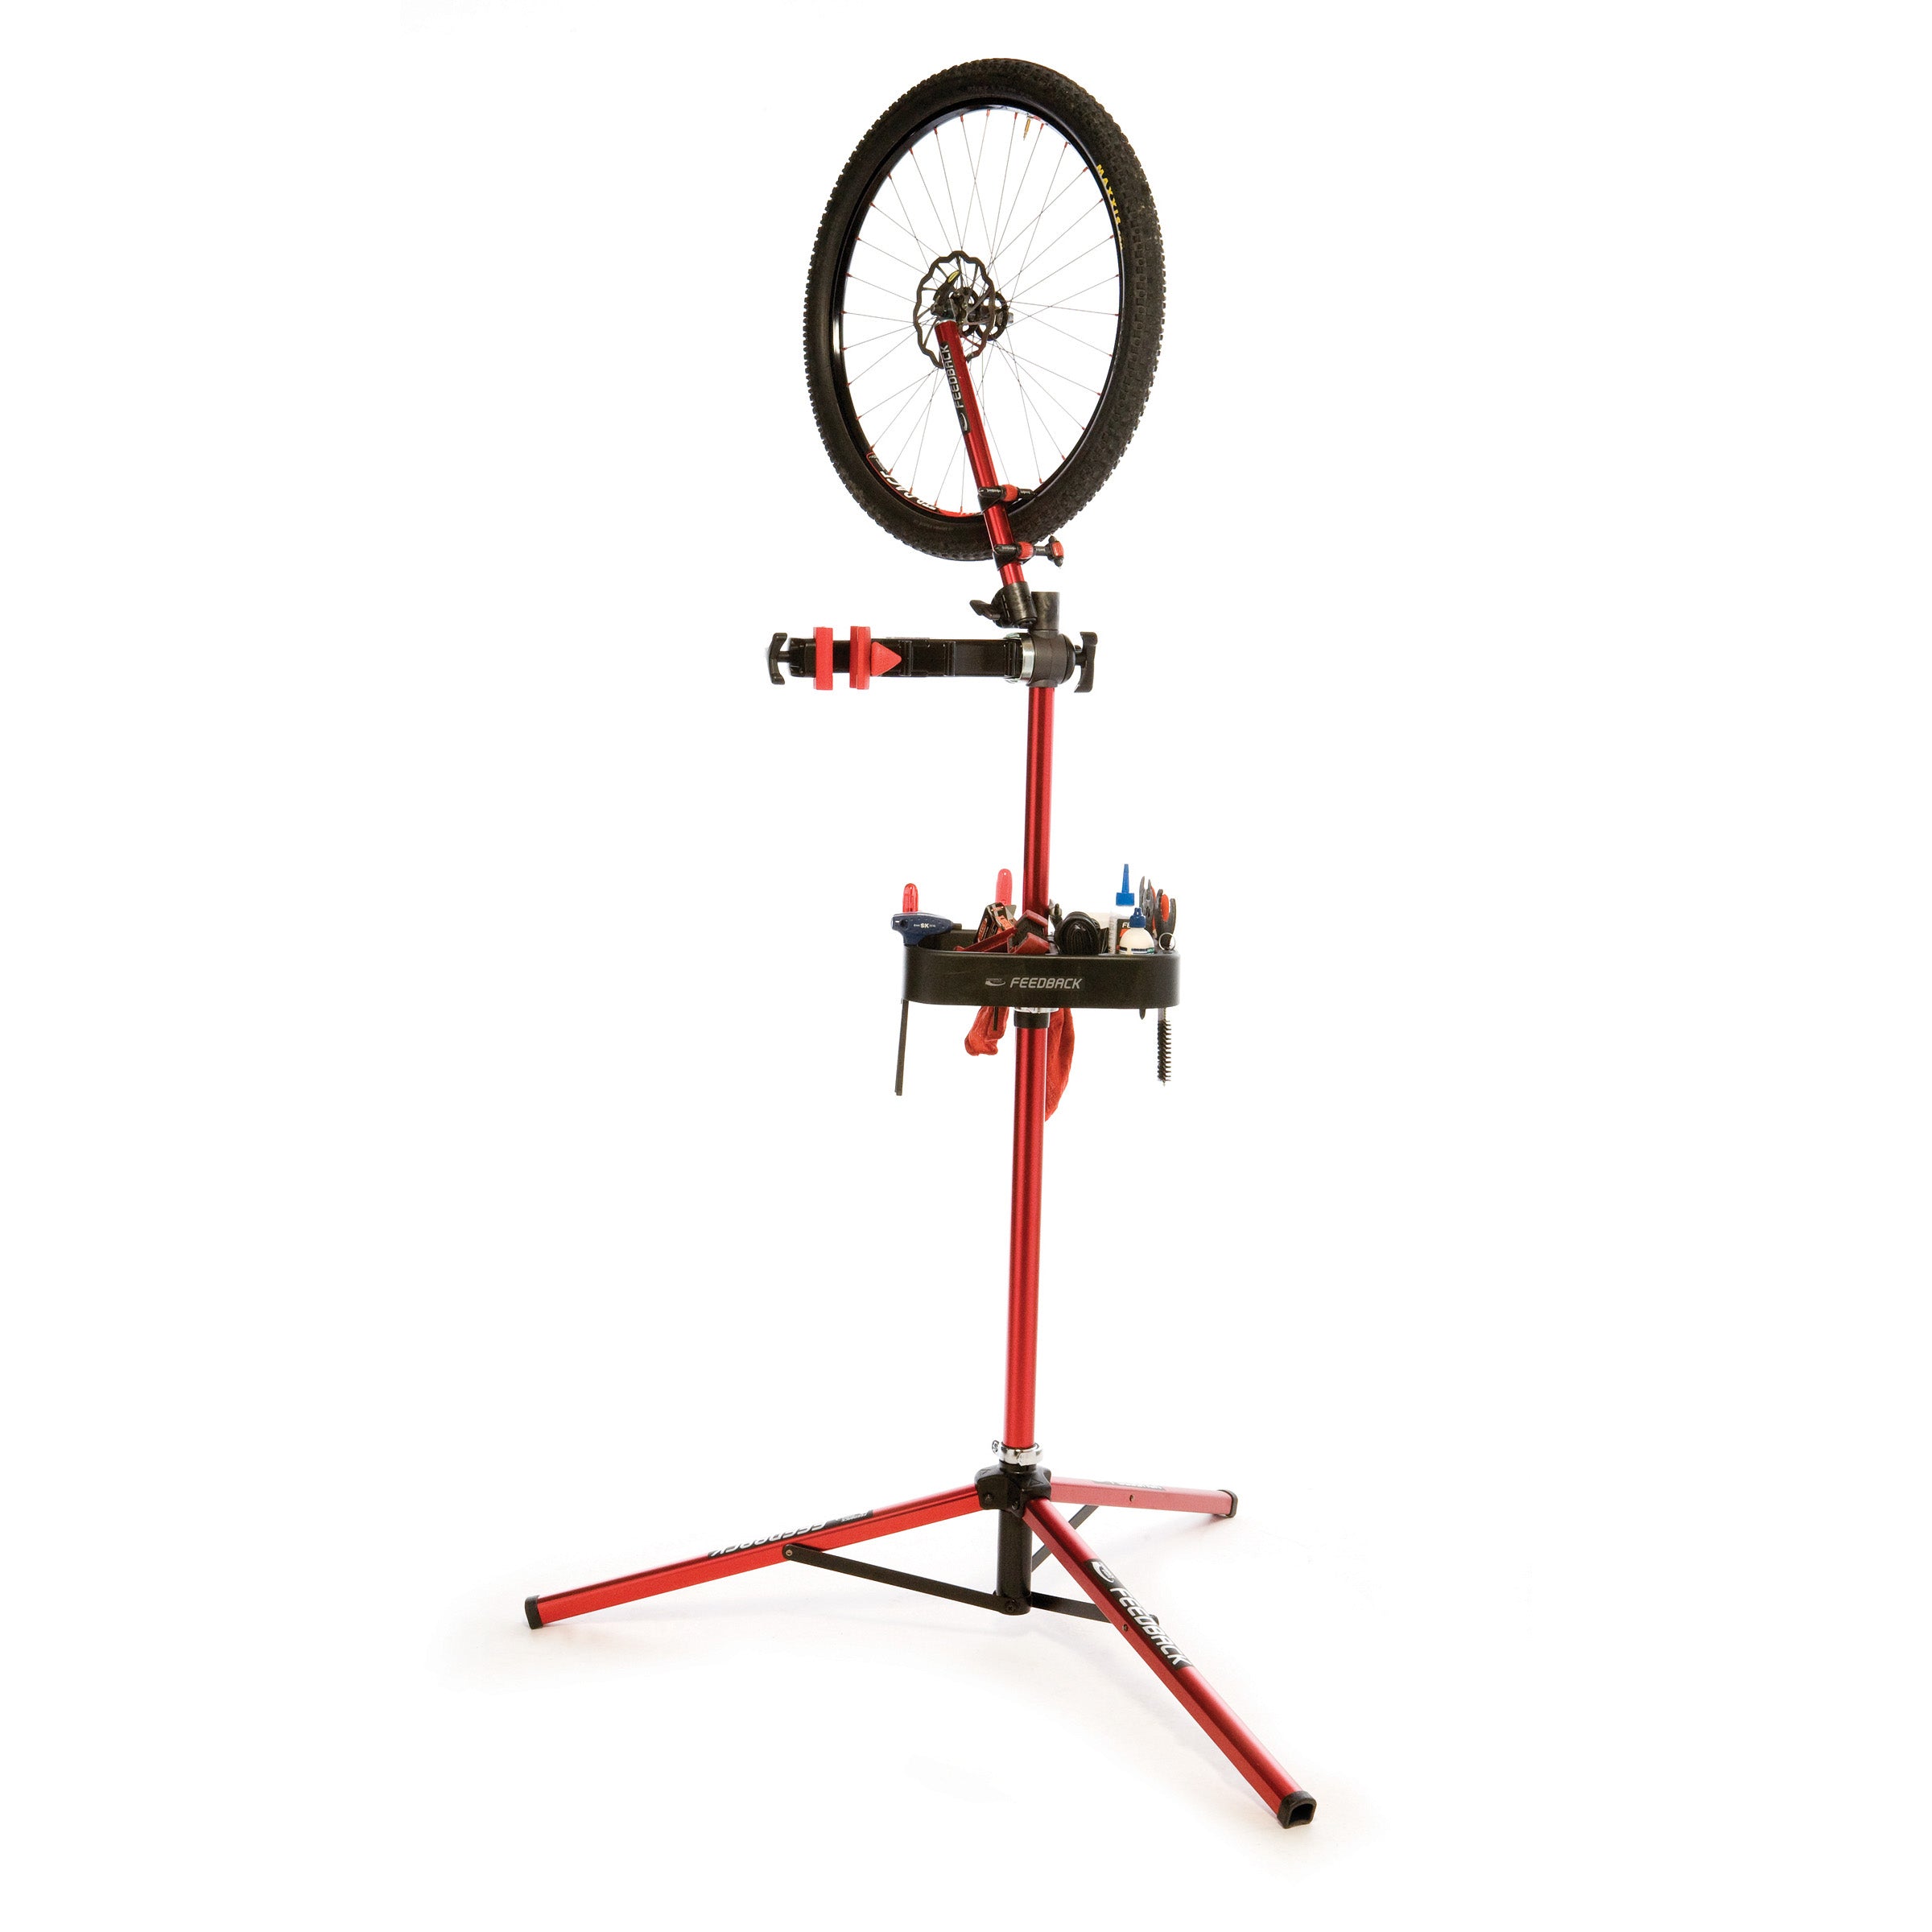 Pro Truing stand mounted on top of a feedback sports repair stand